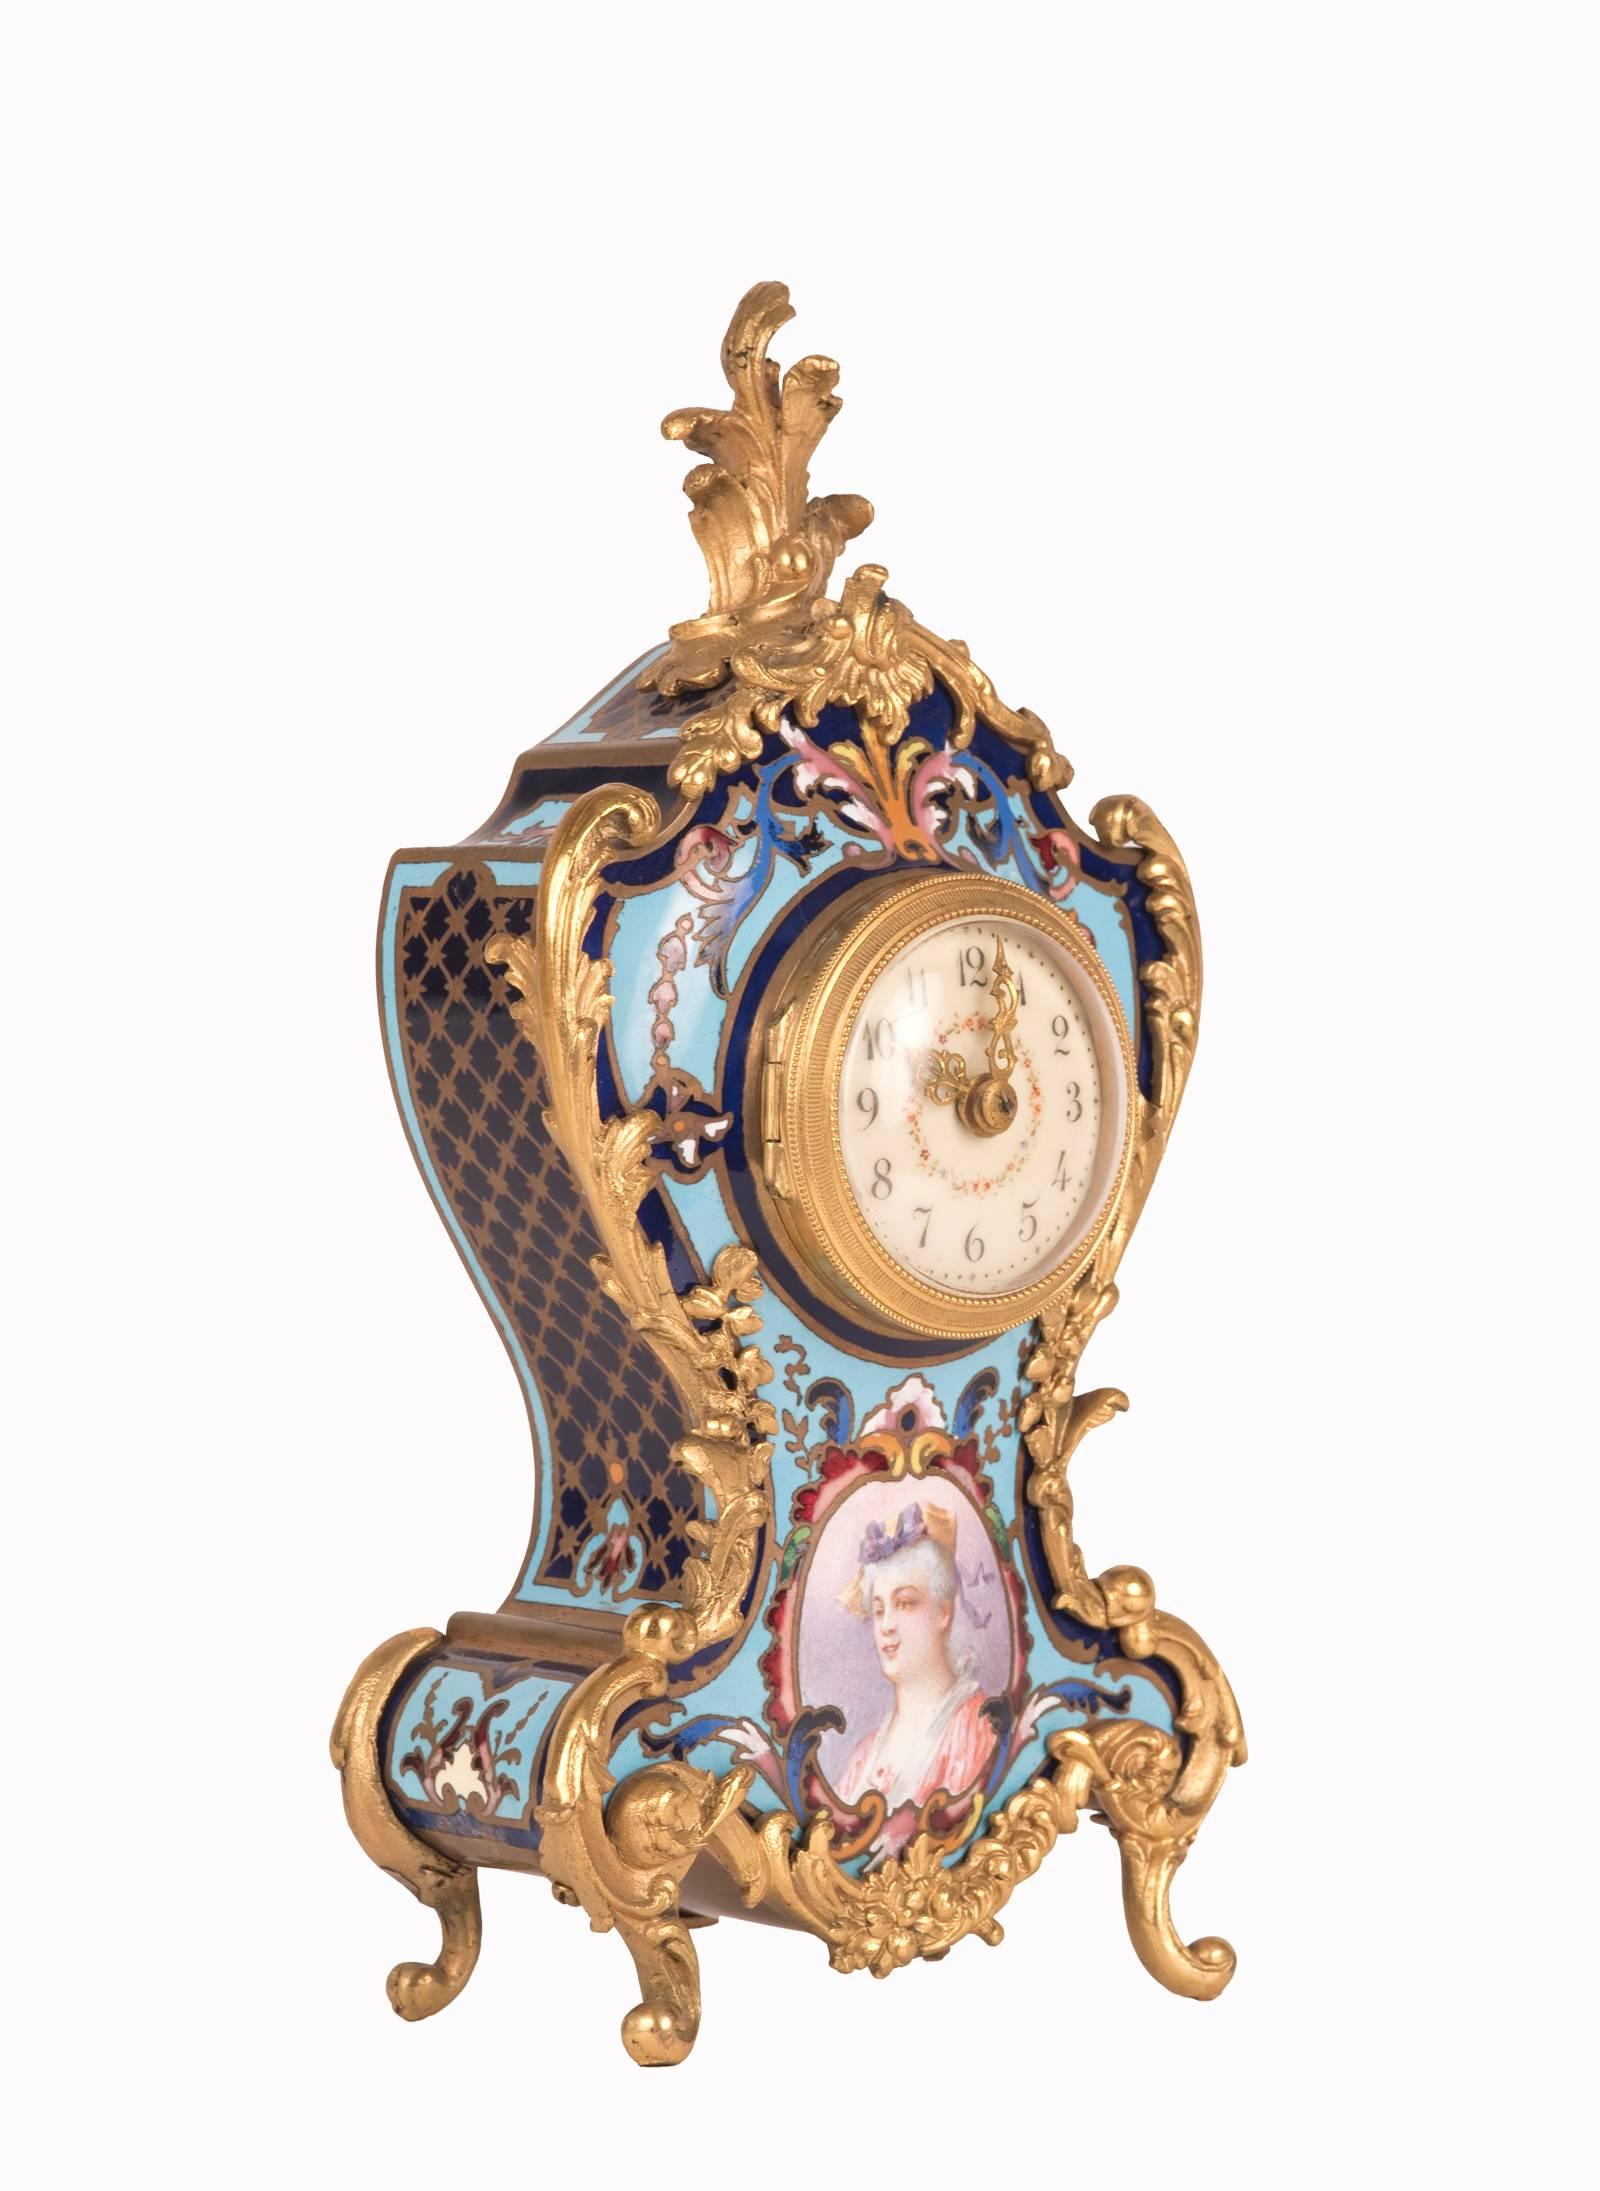 The cartouche form case of brightly colored enamel and circular dial is enhanced with elaborate gilt bronze ormolu with a foliate form finial and sits on C-scroll feet. The case is further decorated with the pastel portrait of a woman.
 